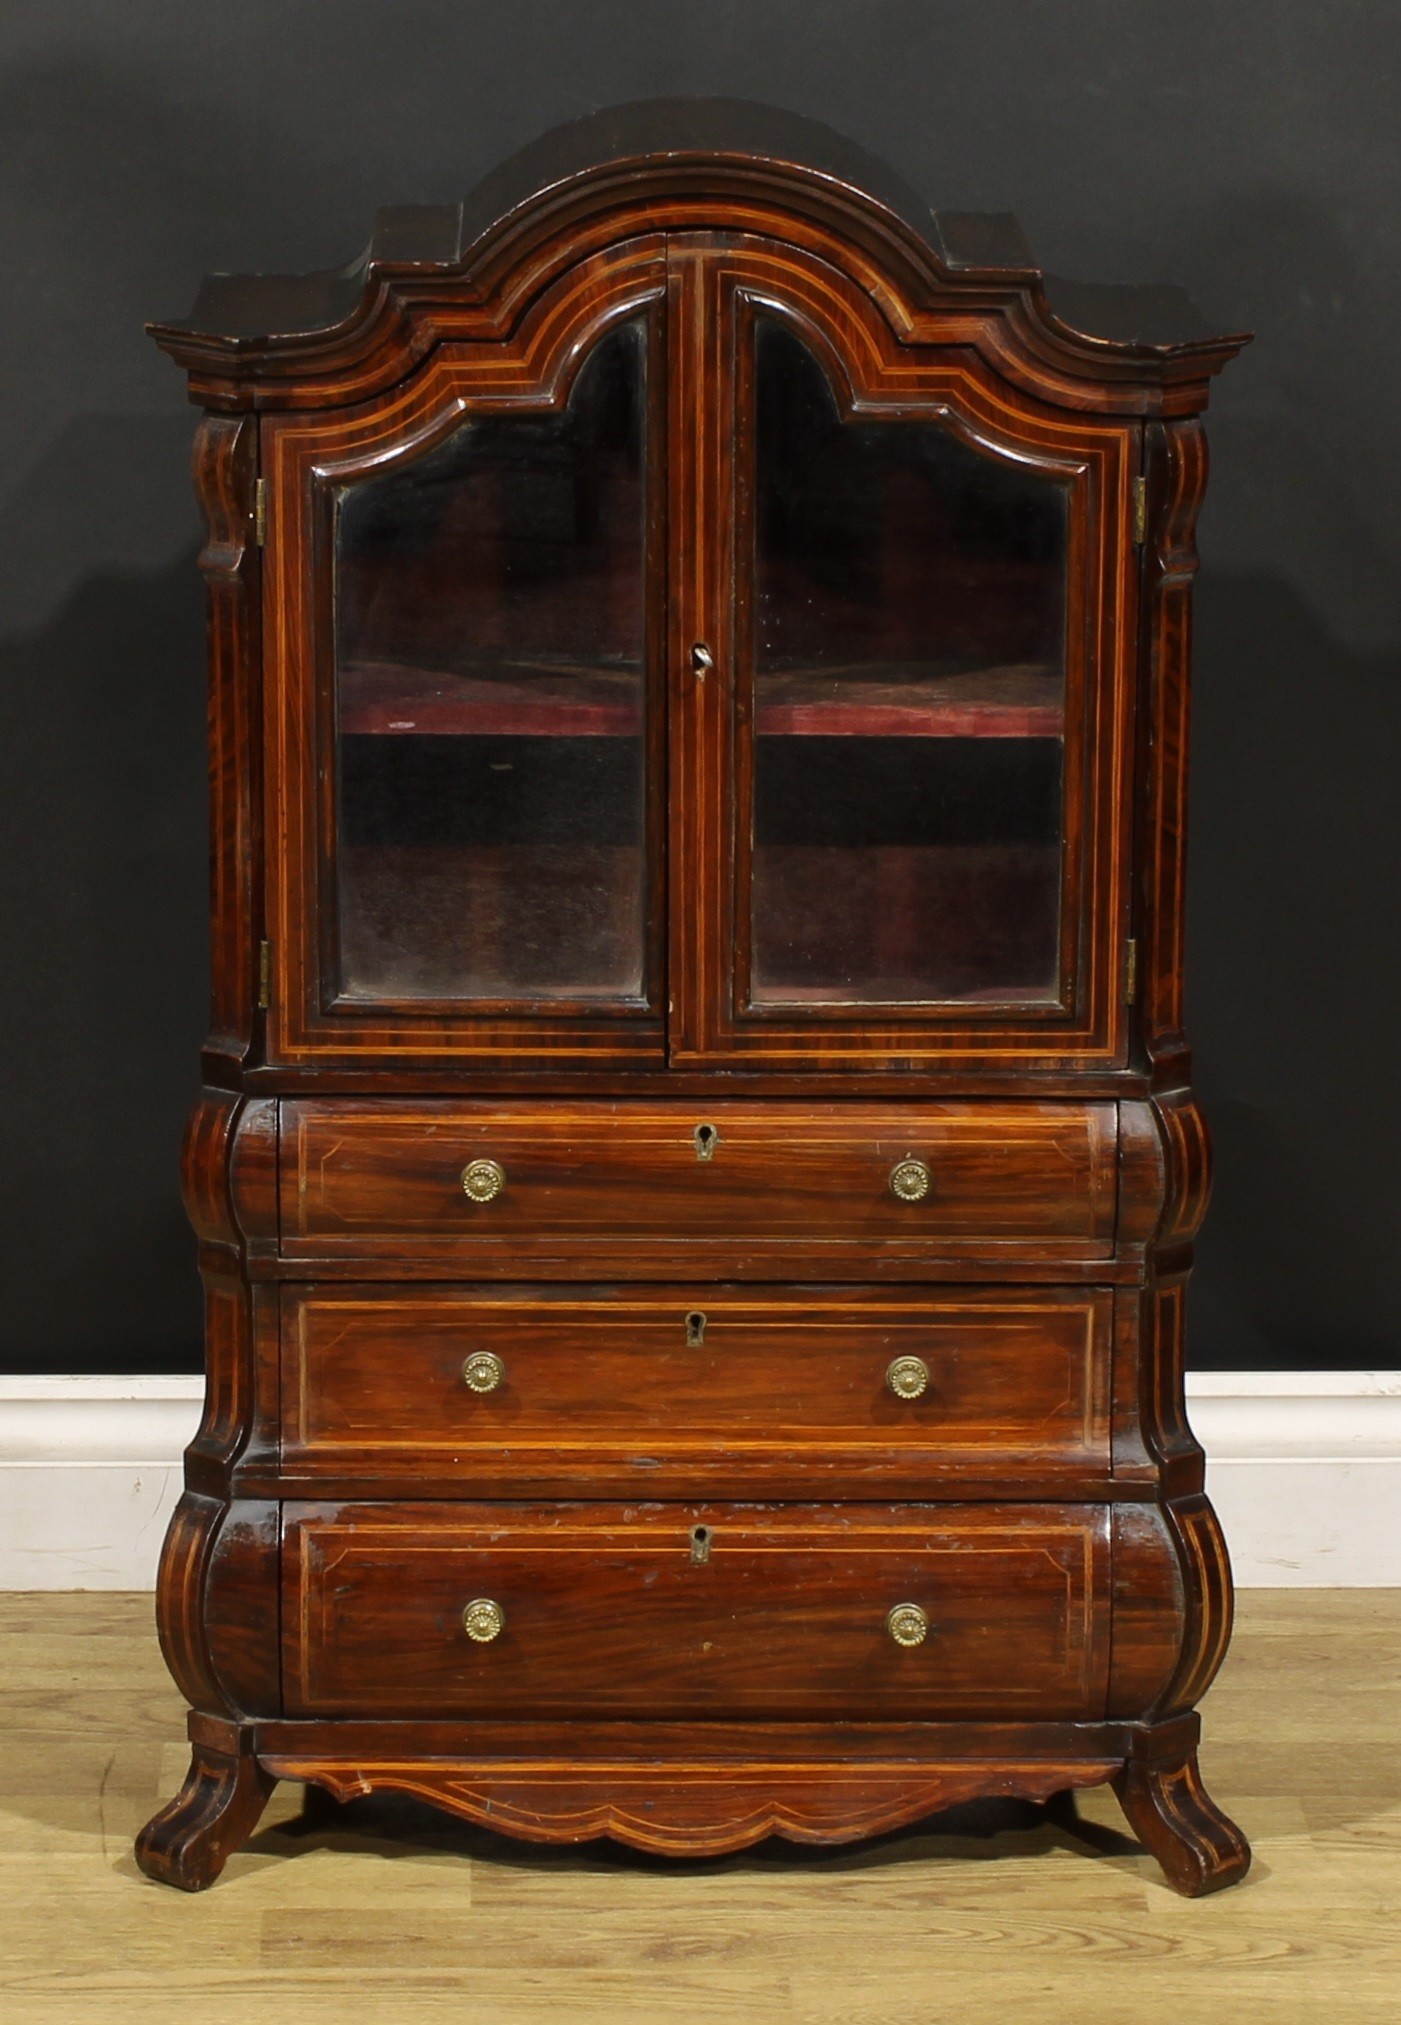 Miniature Furniture - a 19th century rosewood Dutch display cabinet or china closet, shaped arch - Image 2 of 5